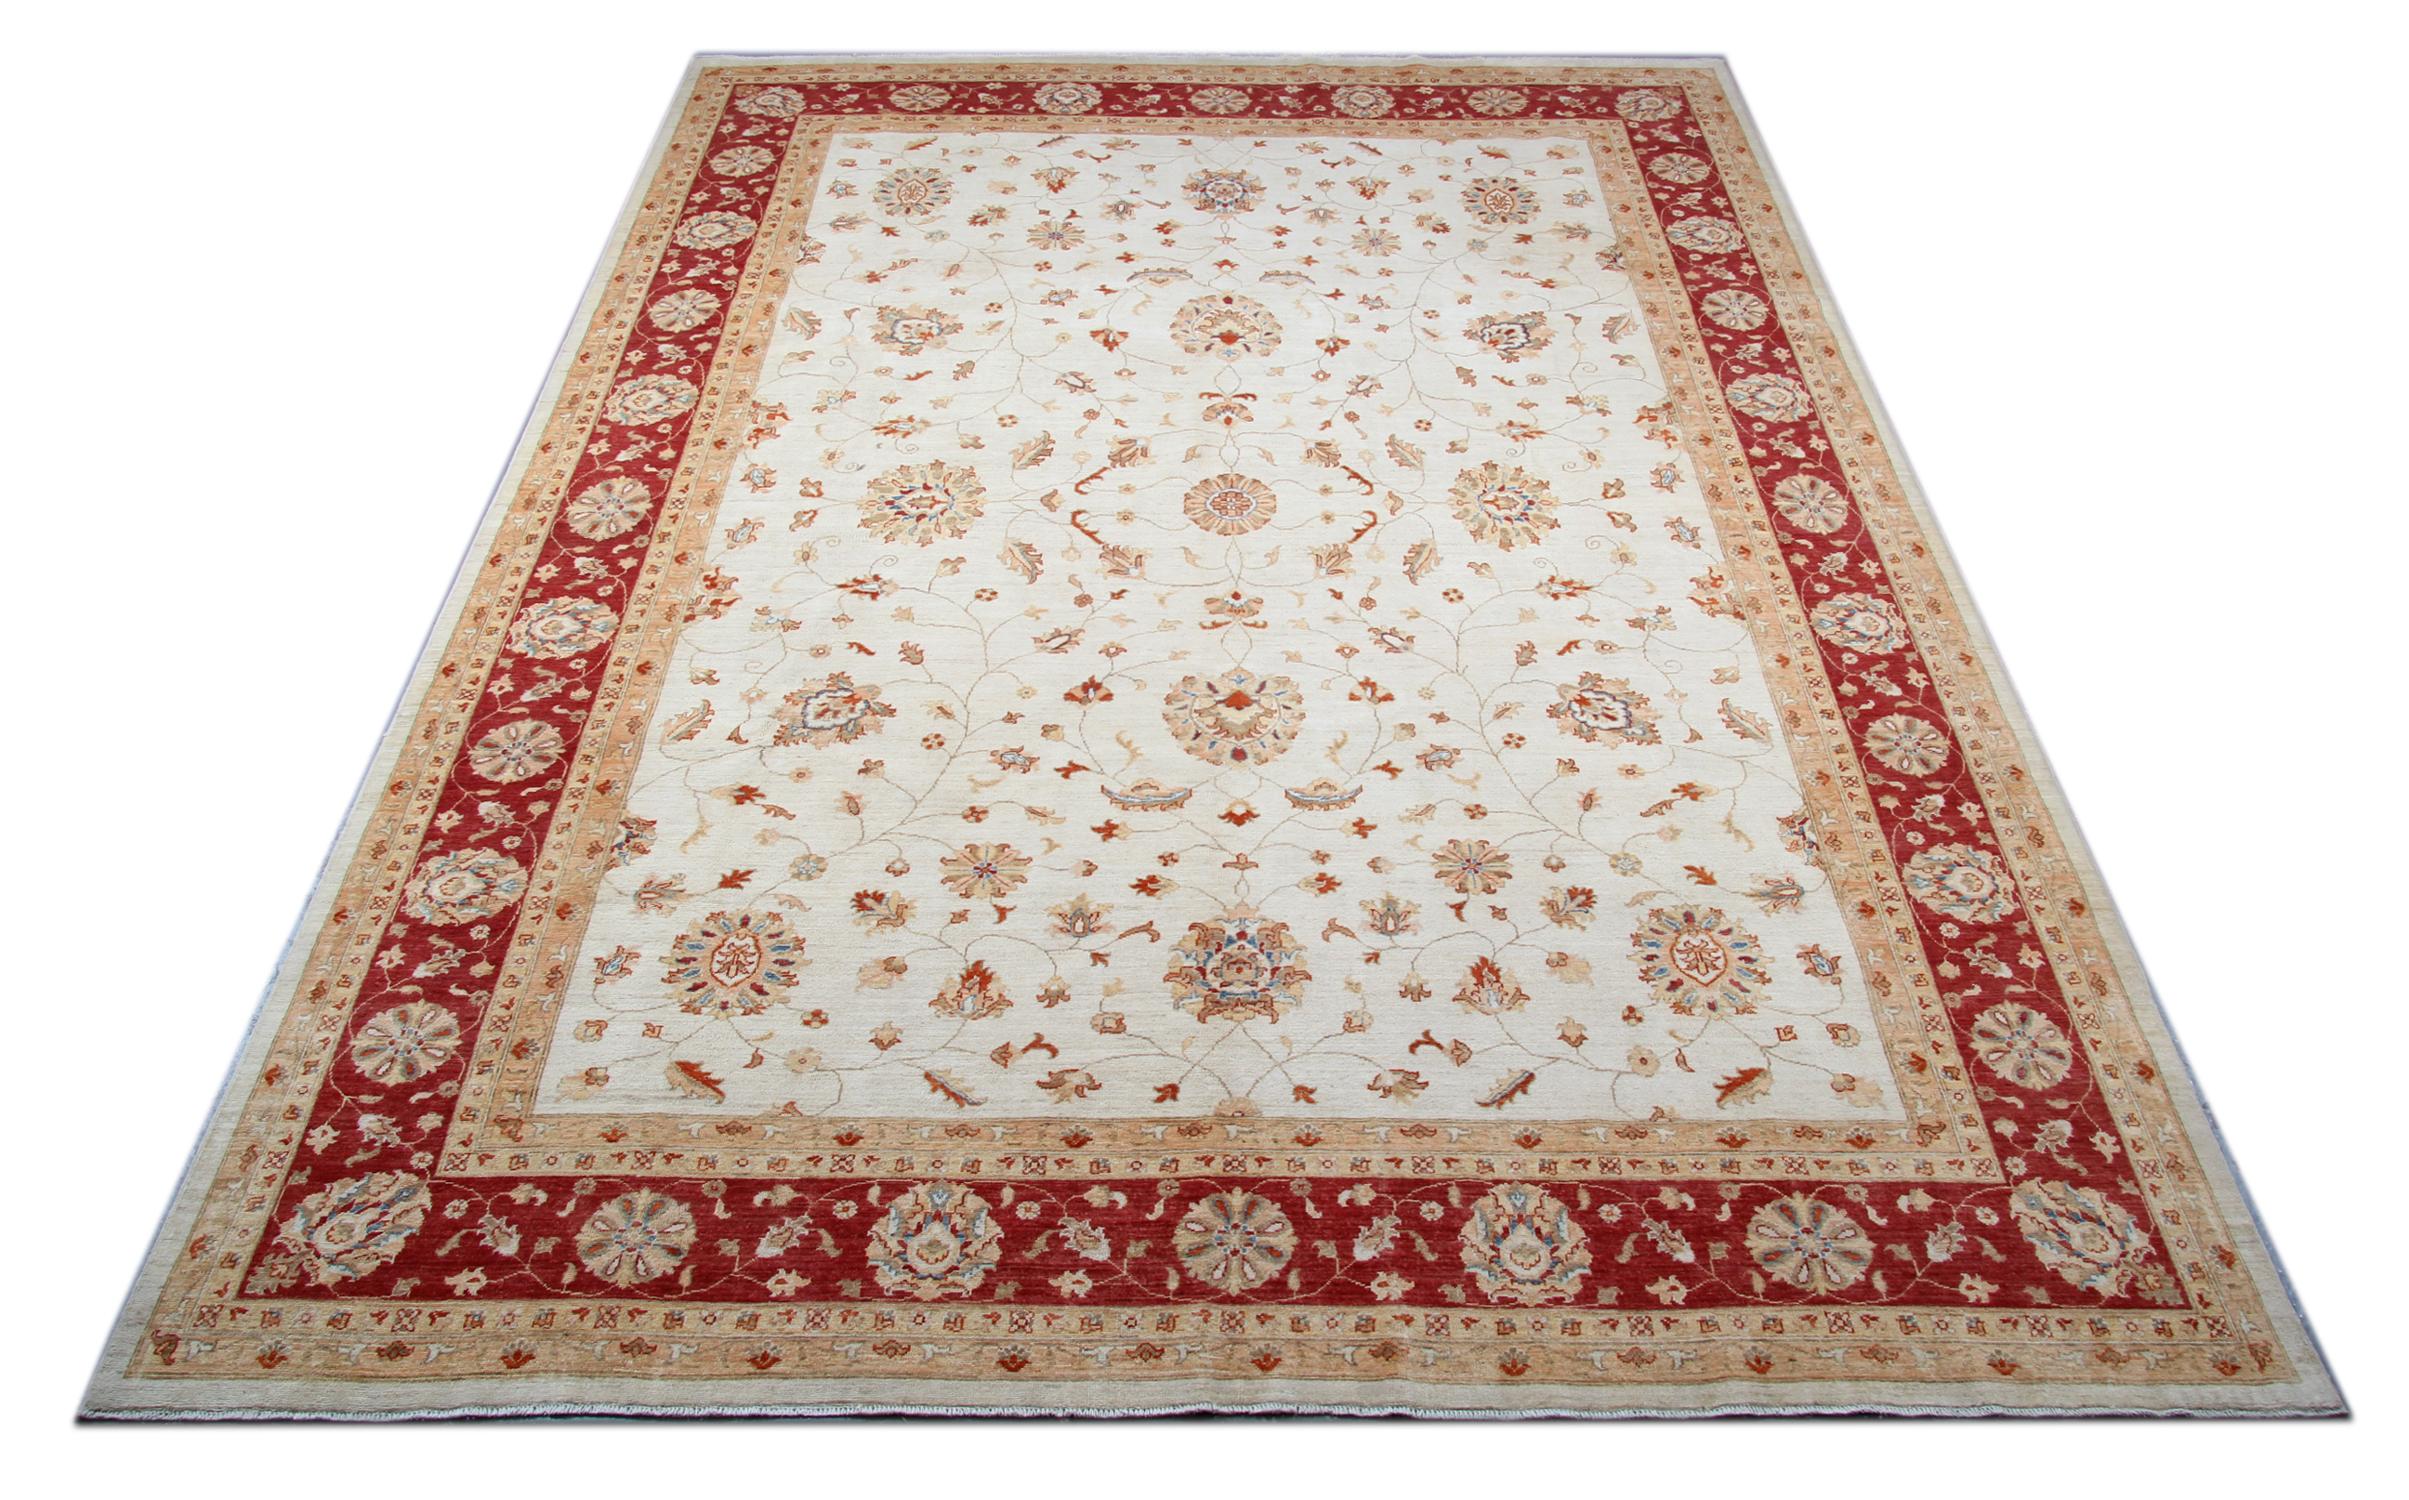 This rug is a Ziegler Sultanabad rug was constructed on our looms by our master weavers in Afghanistan. Featuring a cream and beige floral design woven on an ivory background and a bold red border. Handmade with all natural veg dyes all hand spun